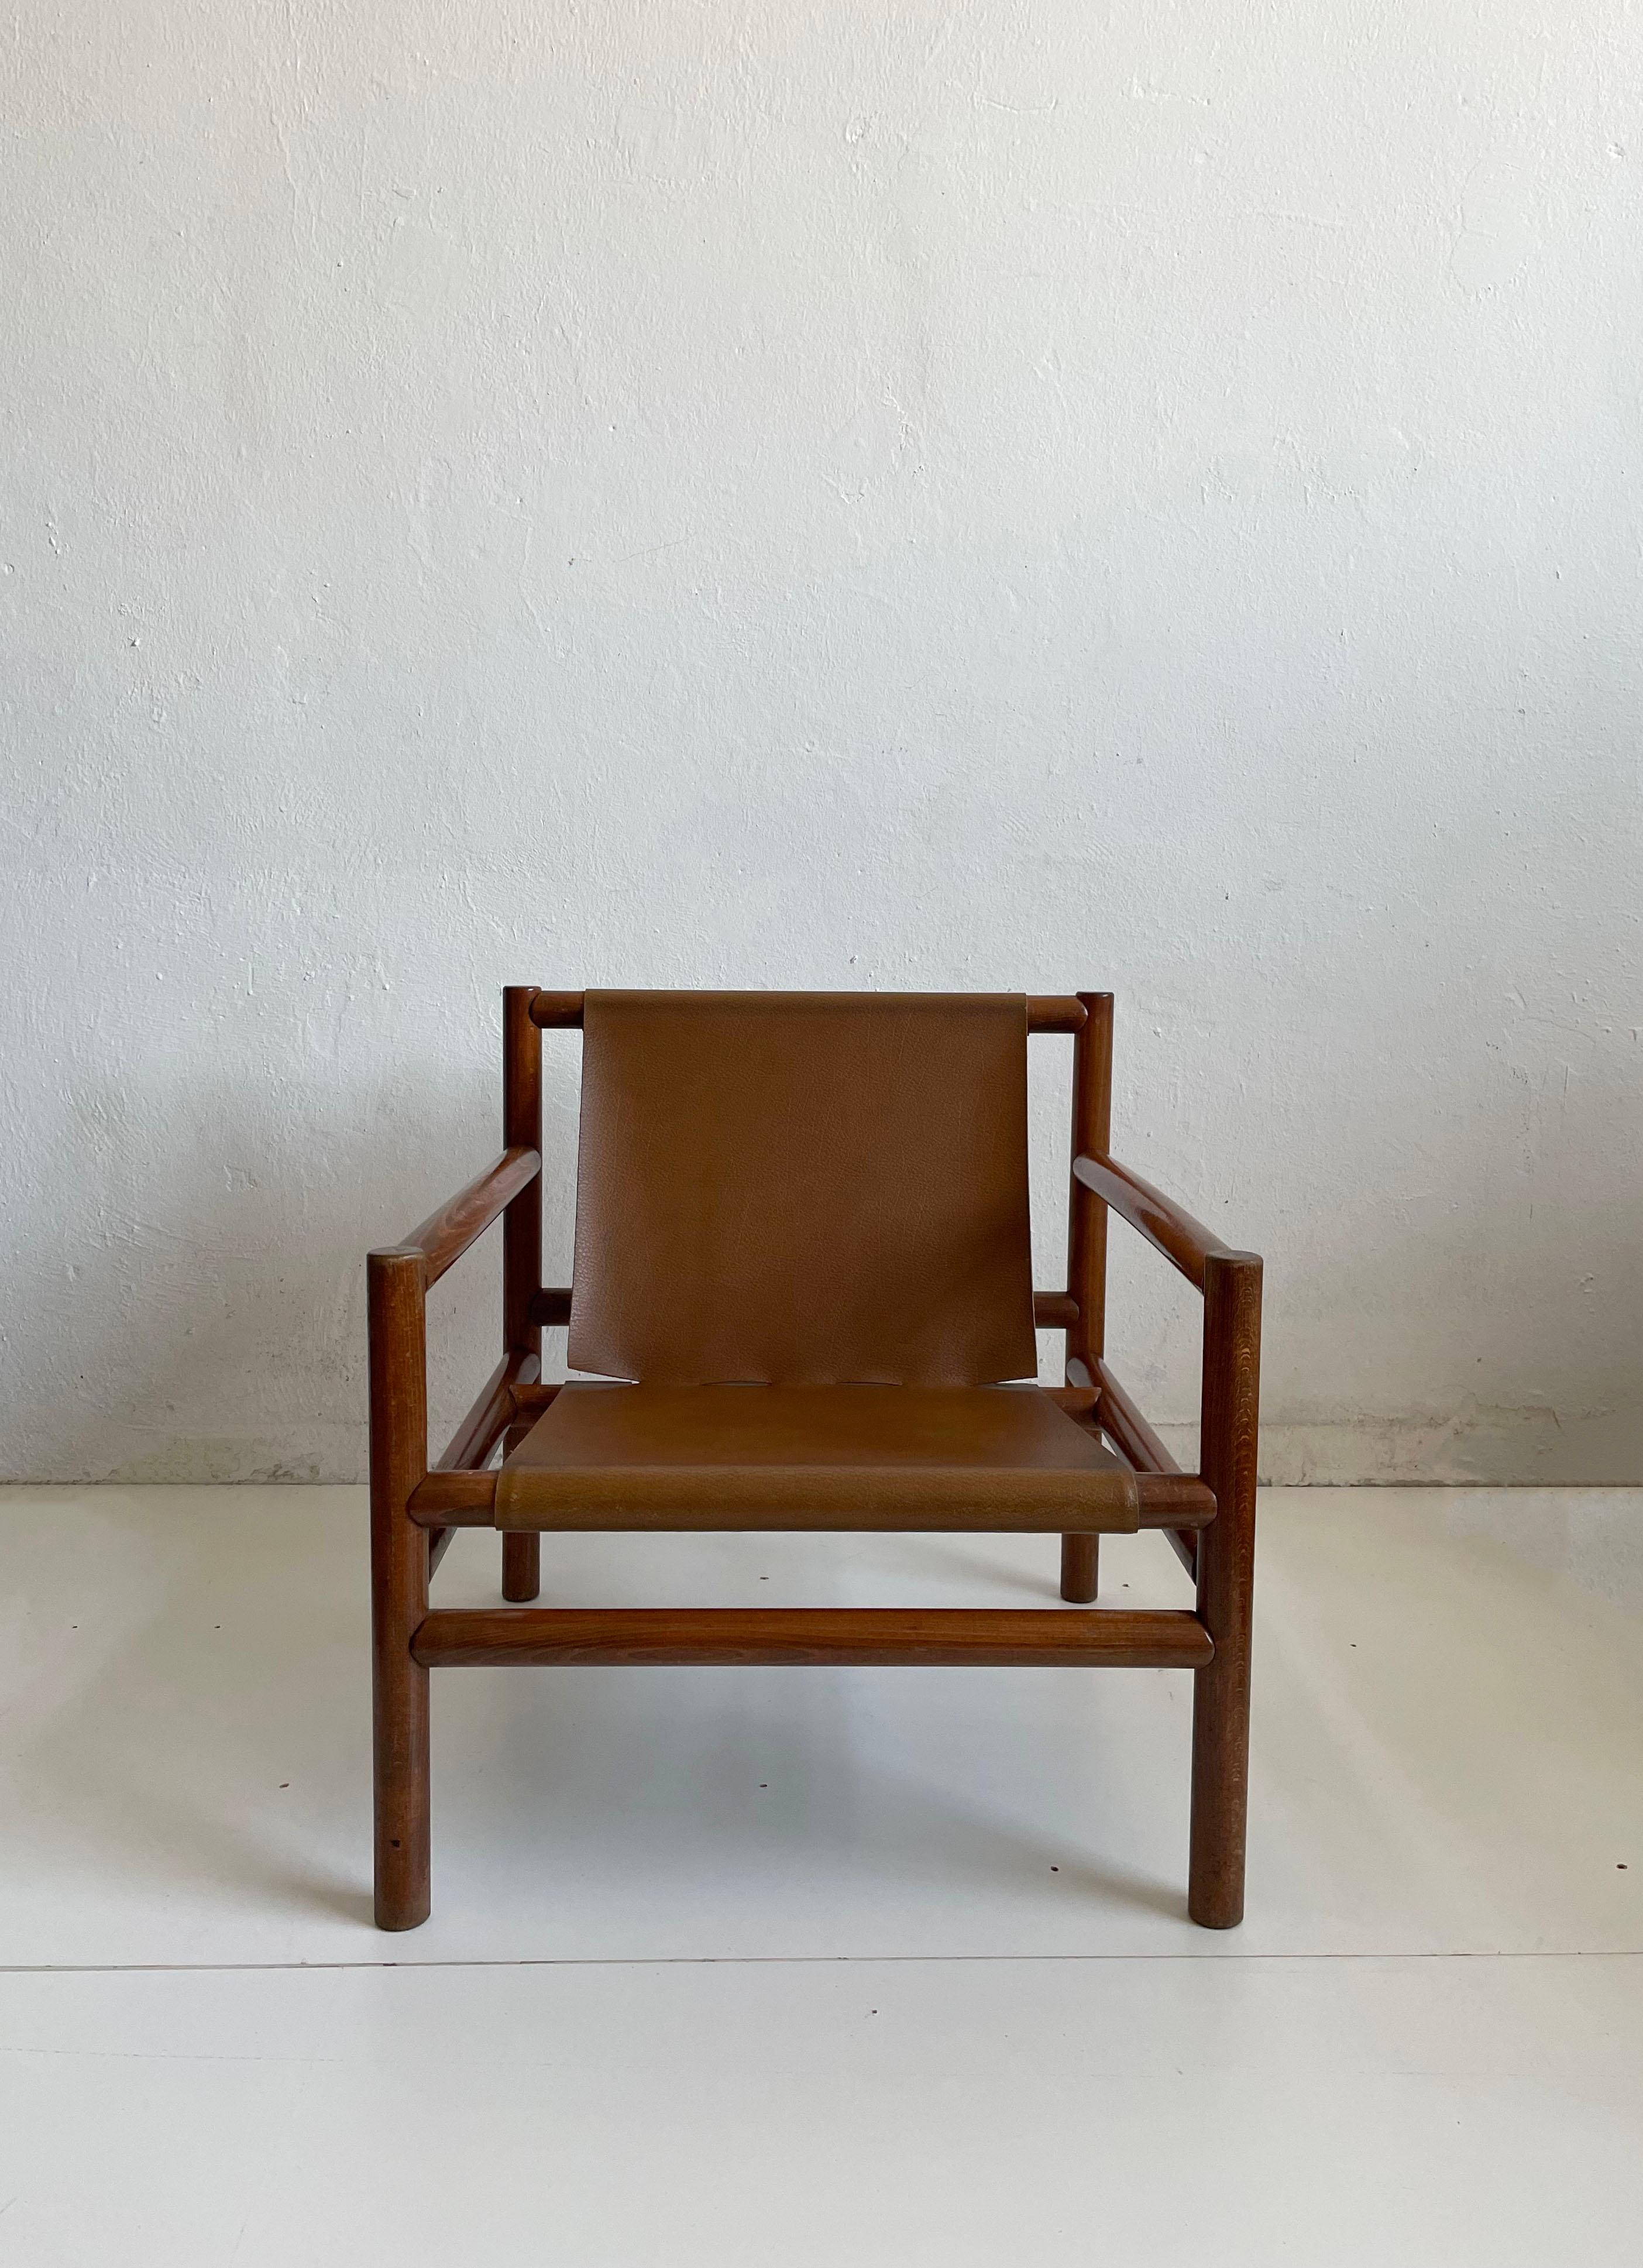 Slovenian Mid-Century Modern Wooden Armchair, Faux Leather Seating, Stol Kamnik 1970s For Sale